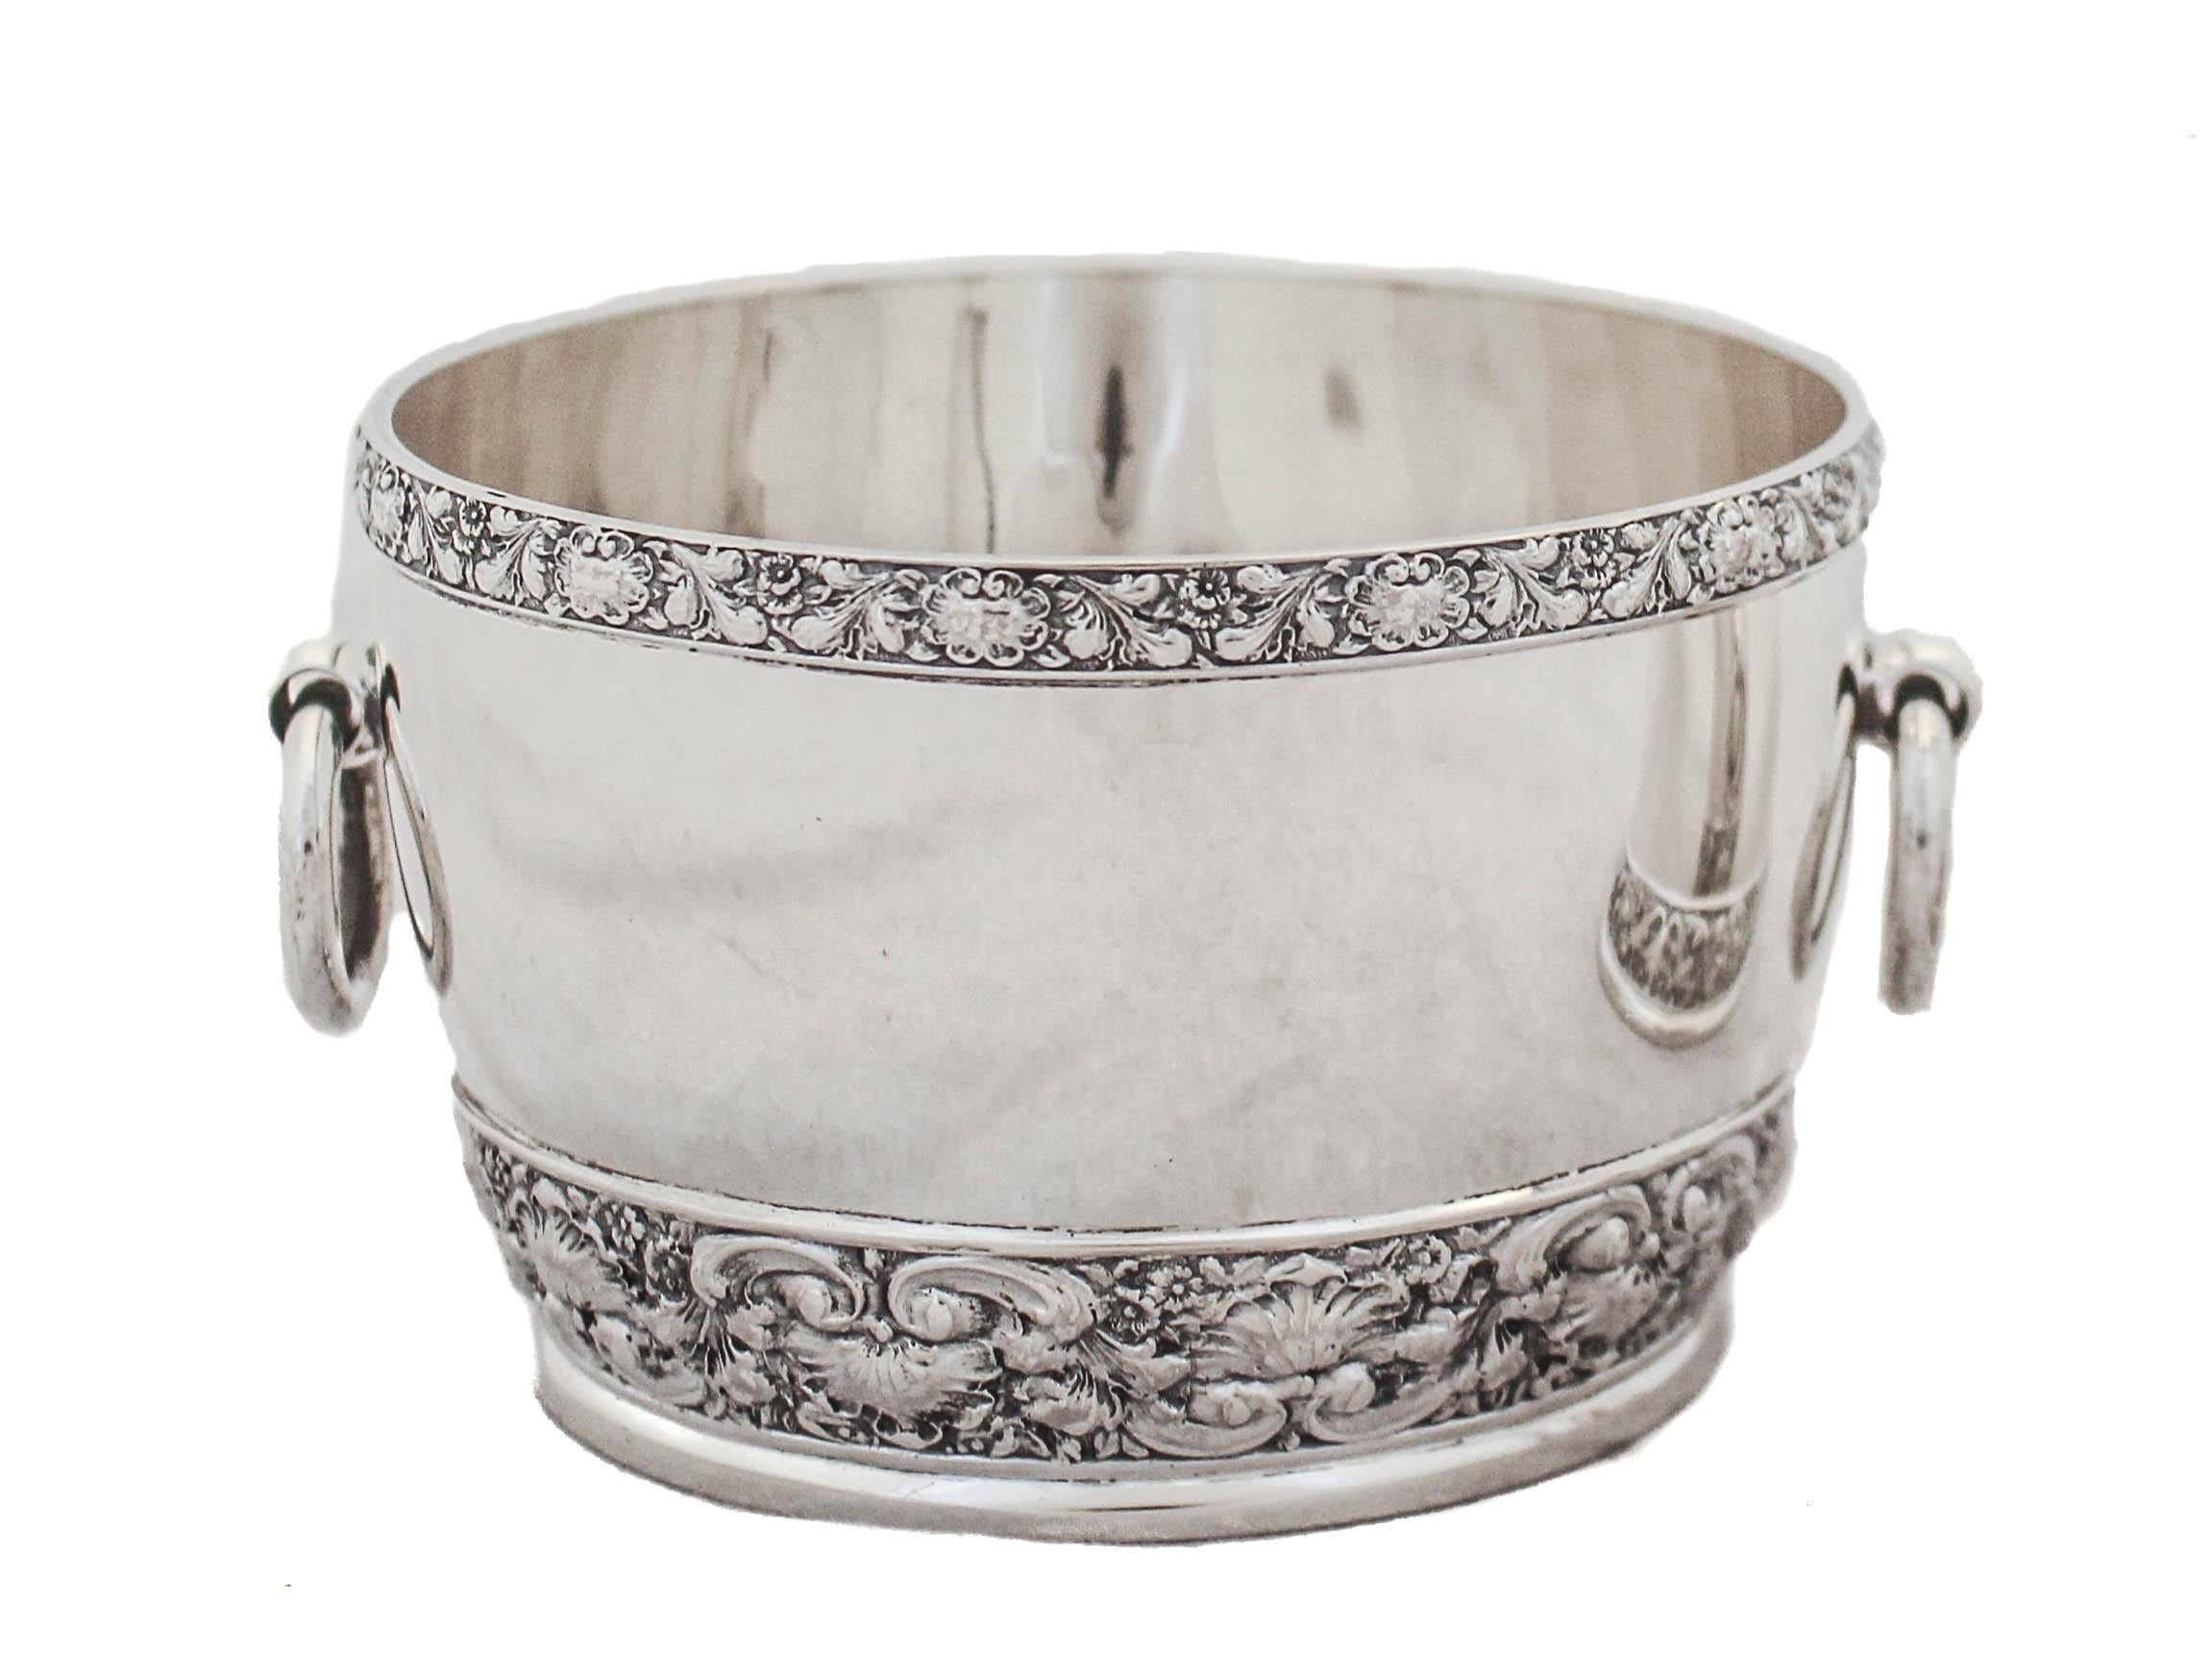 This lovely sterling silver cream and sugar set by the world renowned Tiffany & Company is being offered. The sugar bowl has handles on each side. Around the top rim and base a chased floral motif wraps around. The same design can be found on the